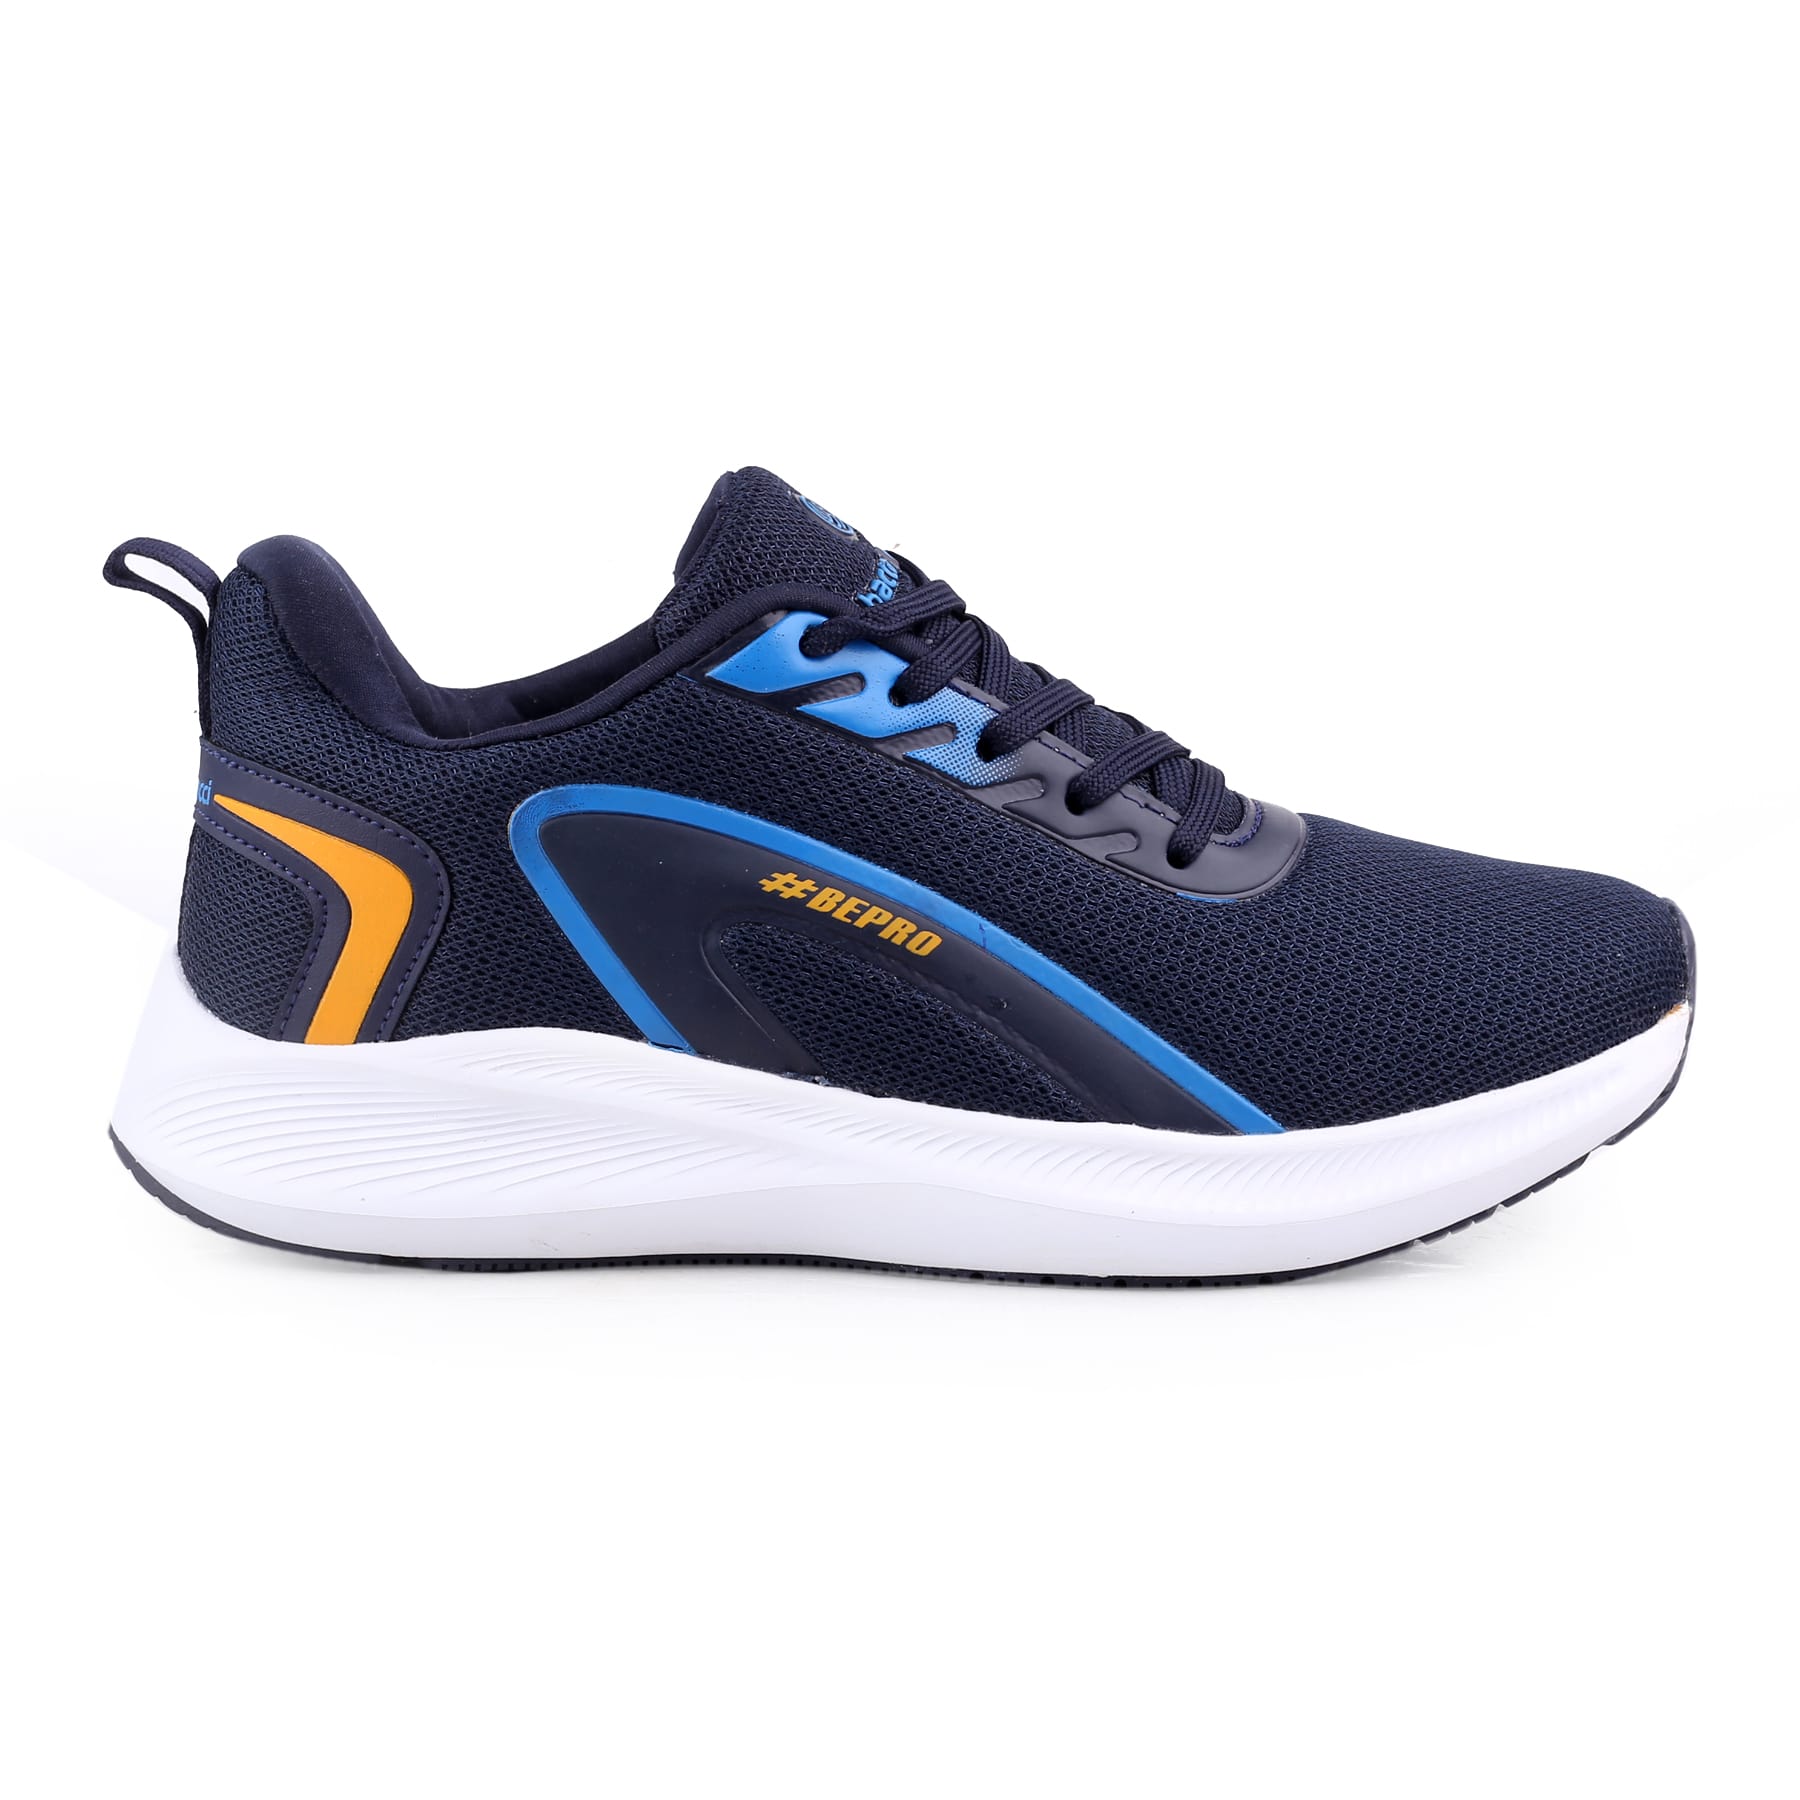 Bacca Bucci Essential All Purpose Walking Running Casual, 47% OFF